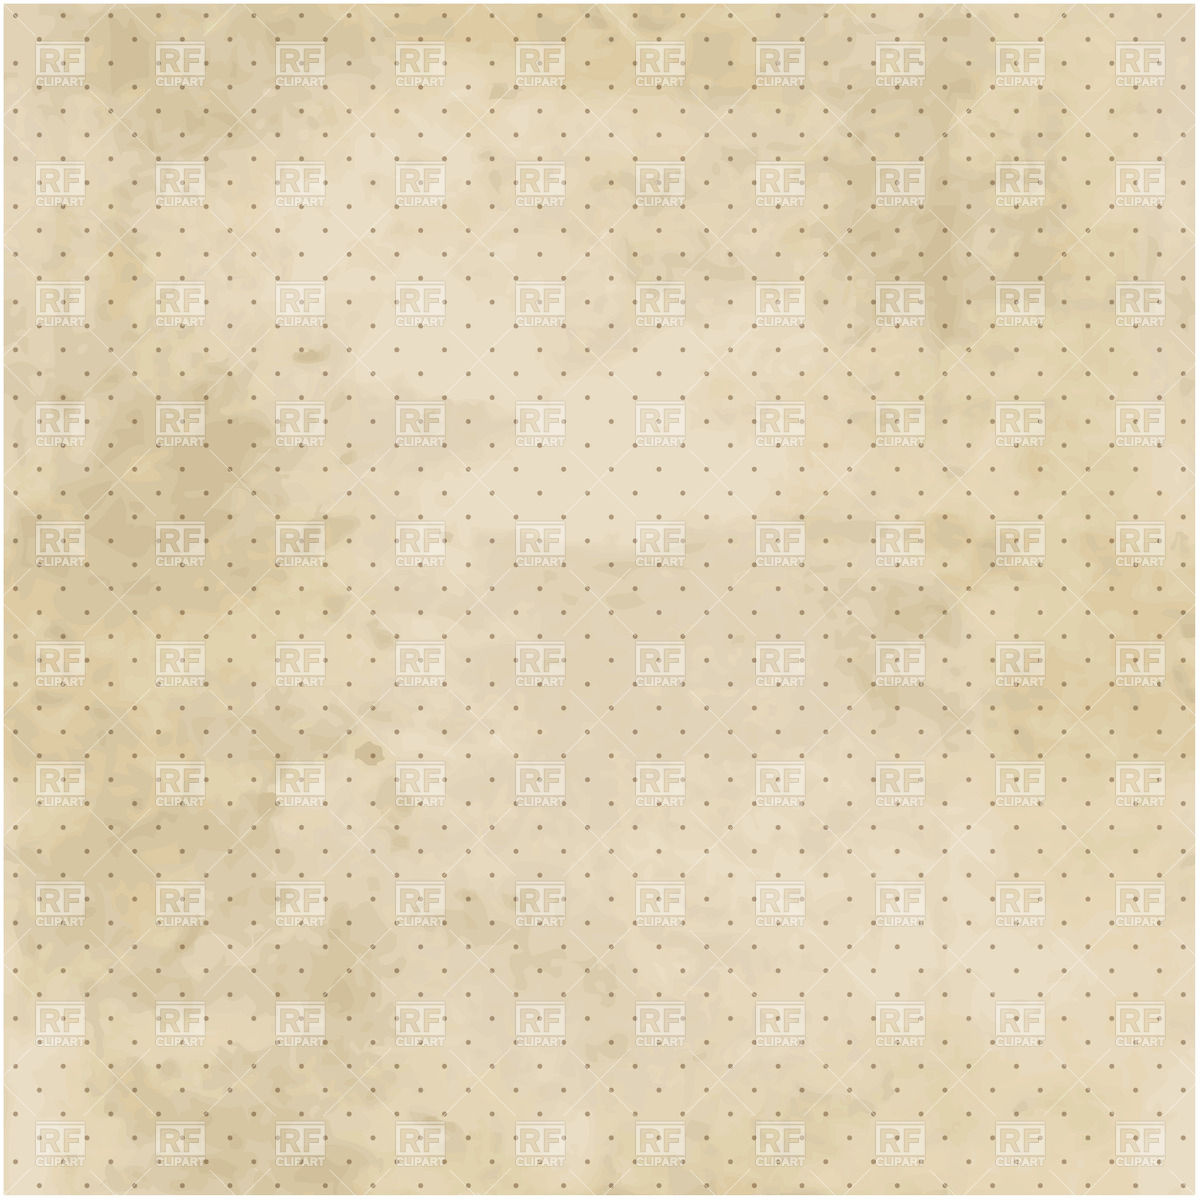 Perforated Grunge Texture Download Royalty Free Vector Clipart  Eps